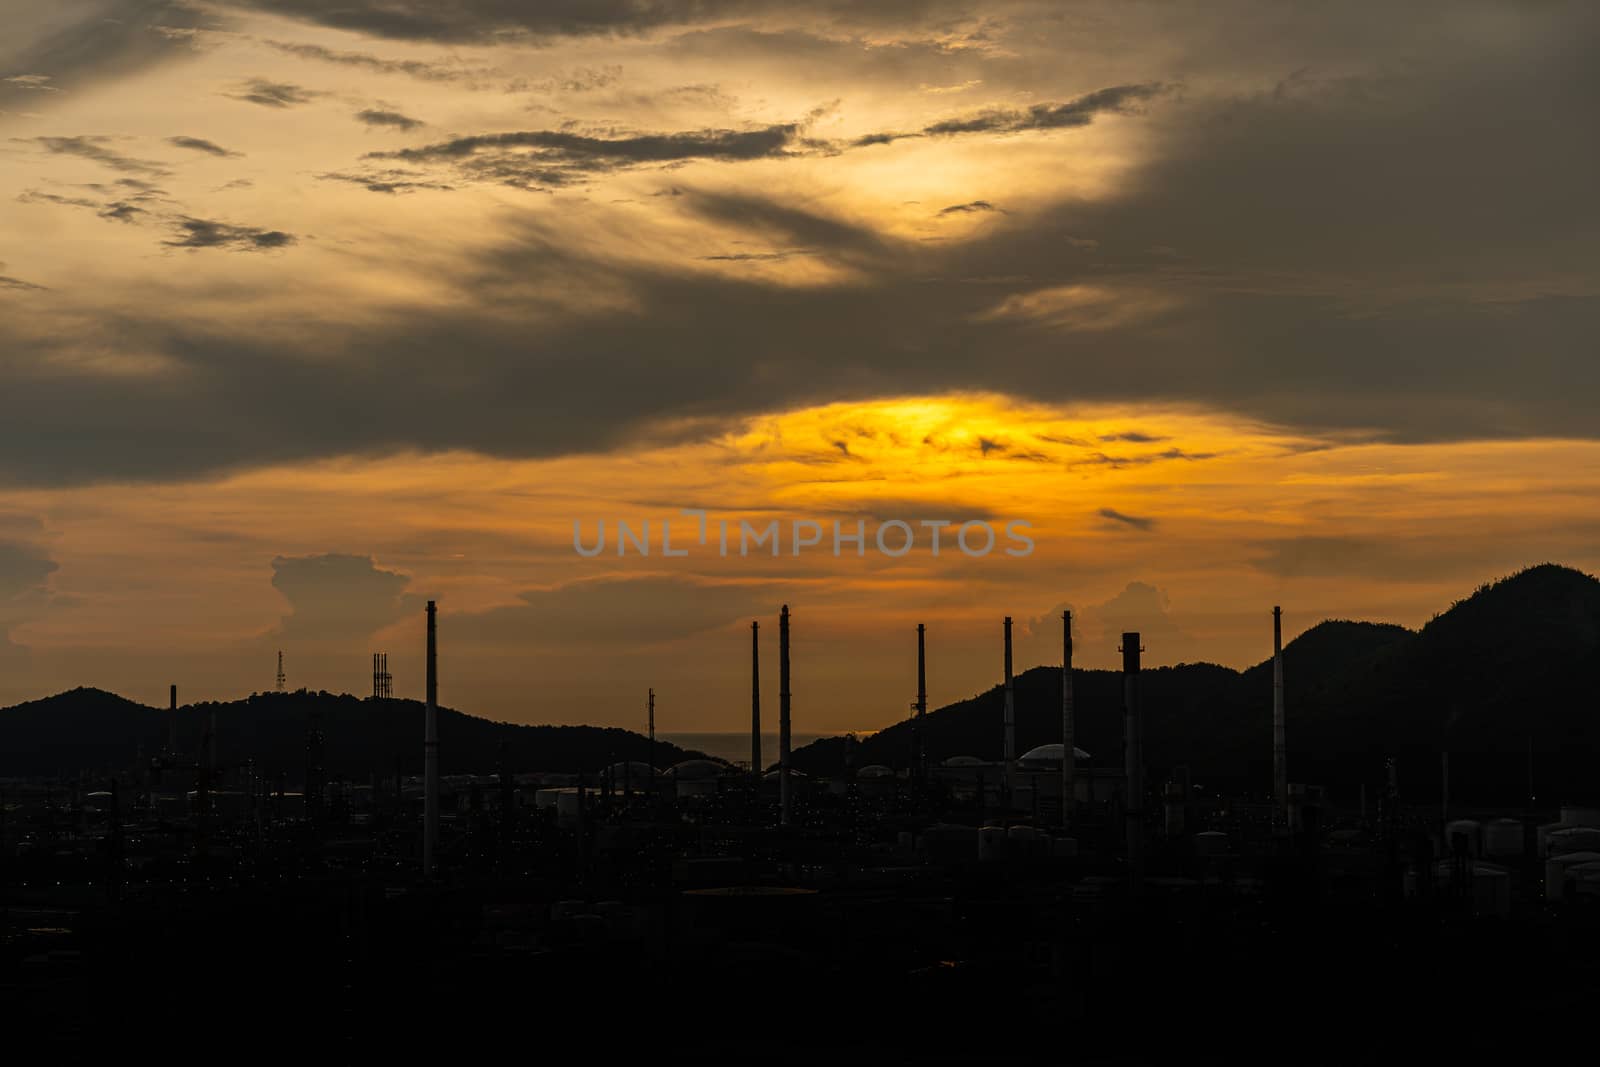 Oil Or Gas Refinery At Sunset. A silhouette of an oil or gas industrial refinery at sunset with a colourful sky behind by peerapixs